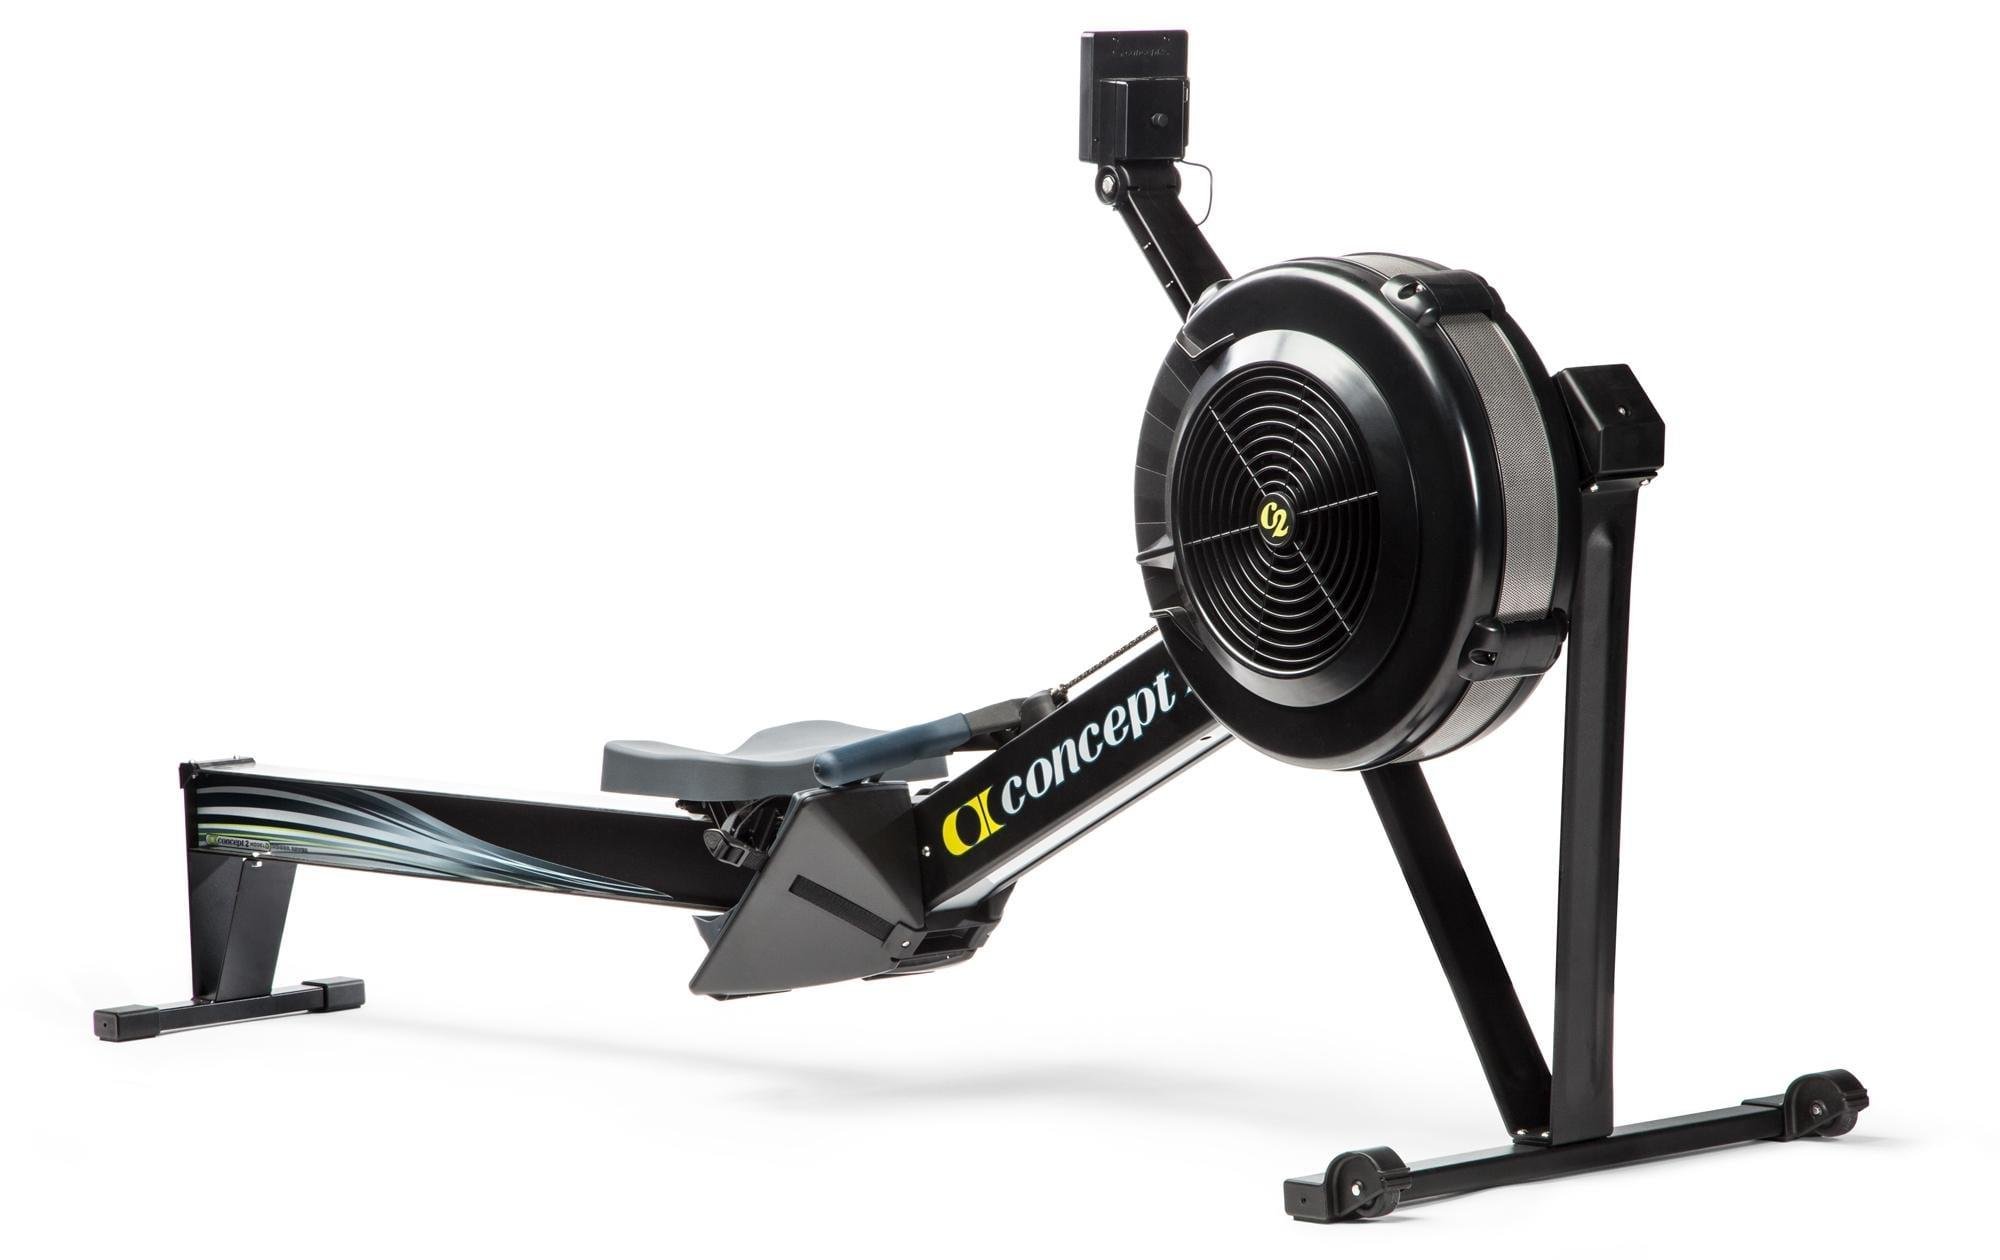 Concept 2 Rower $900 +45 shipping